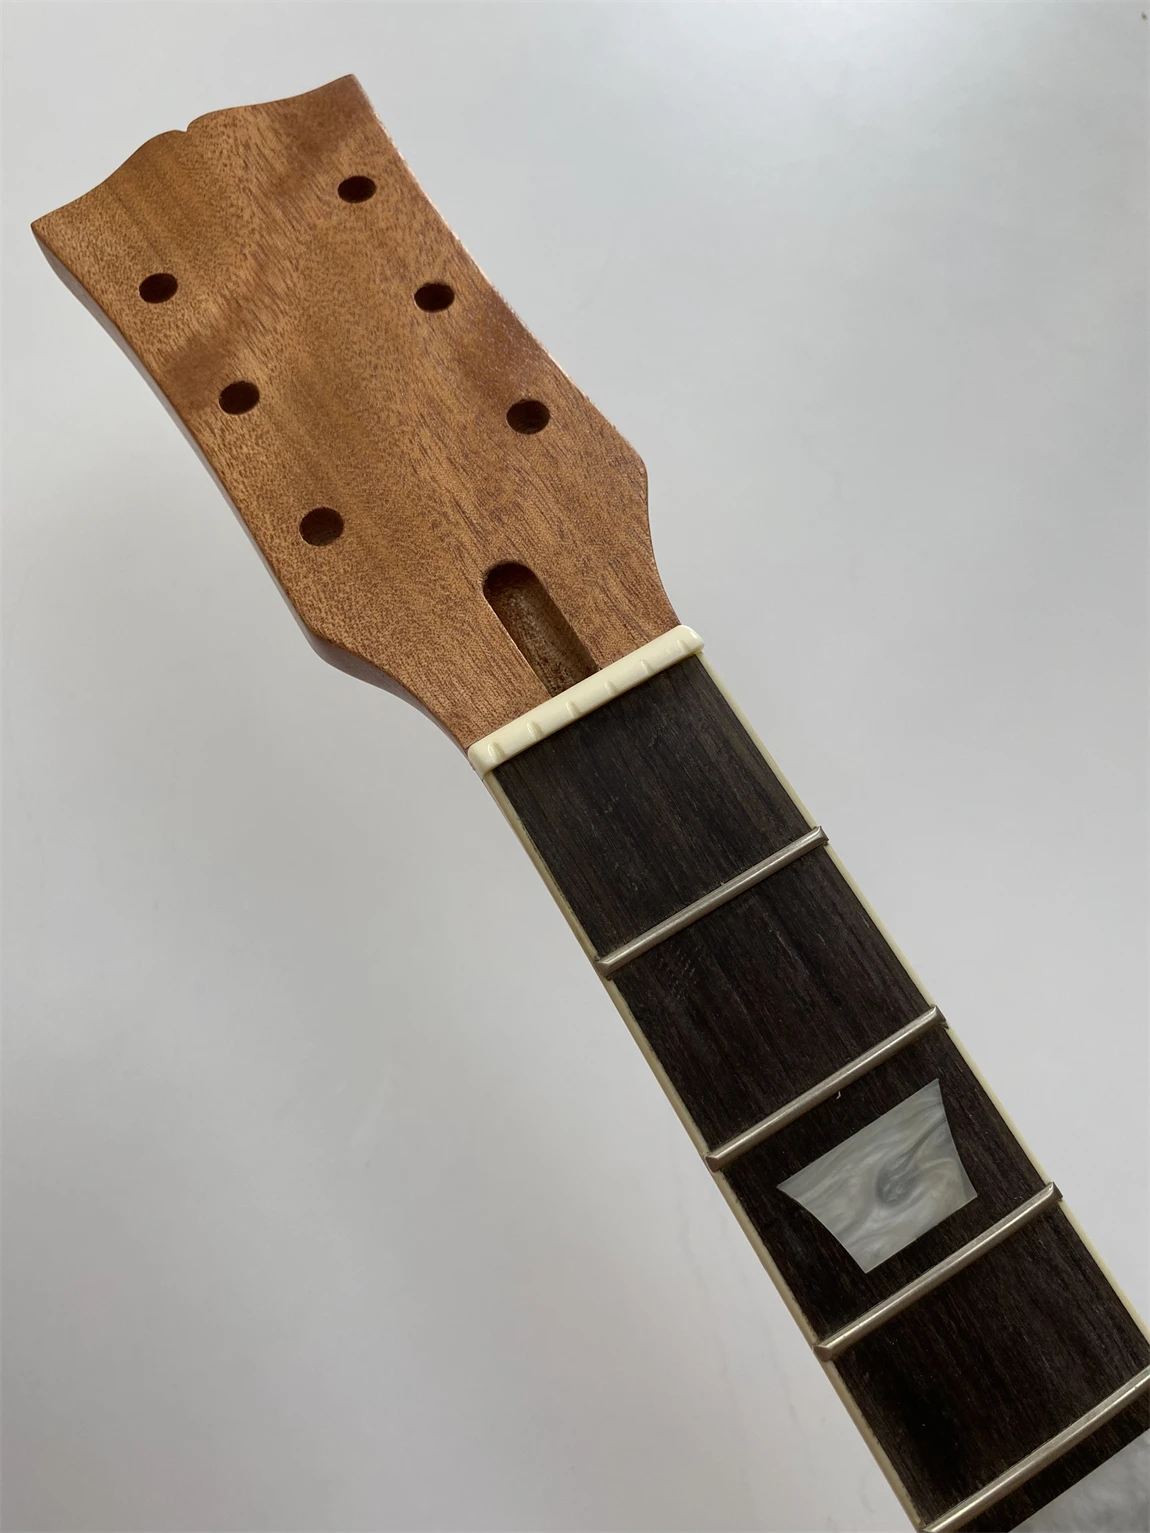 DIY Electric Guitar NeckMahogany 22 Fret 24.75inch Rosewood Fretboard Parts